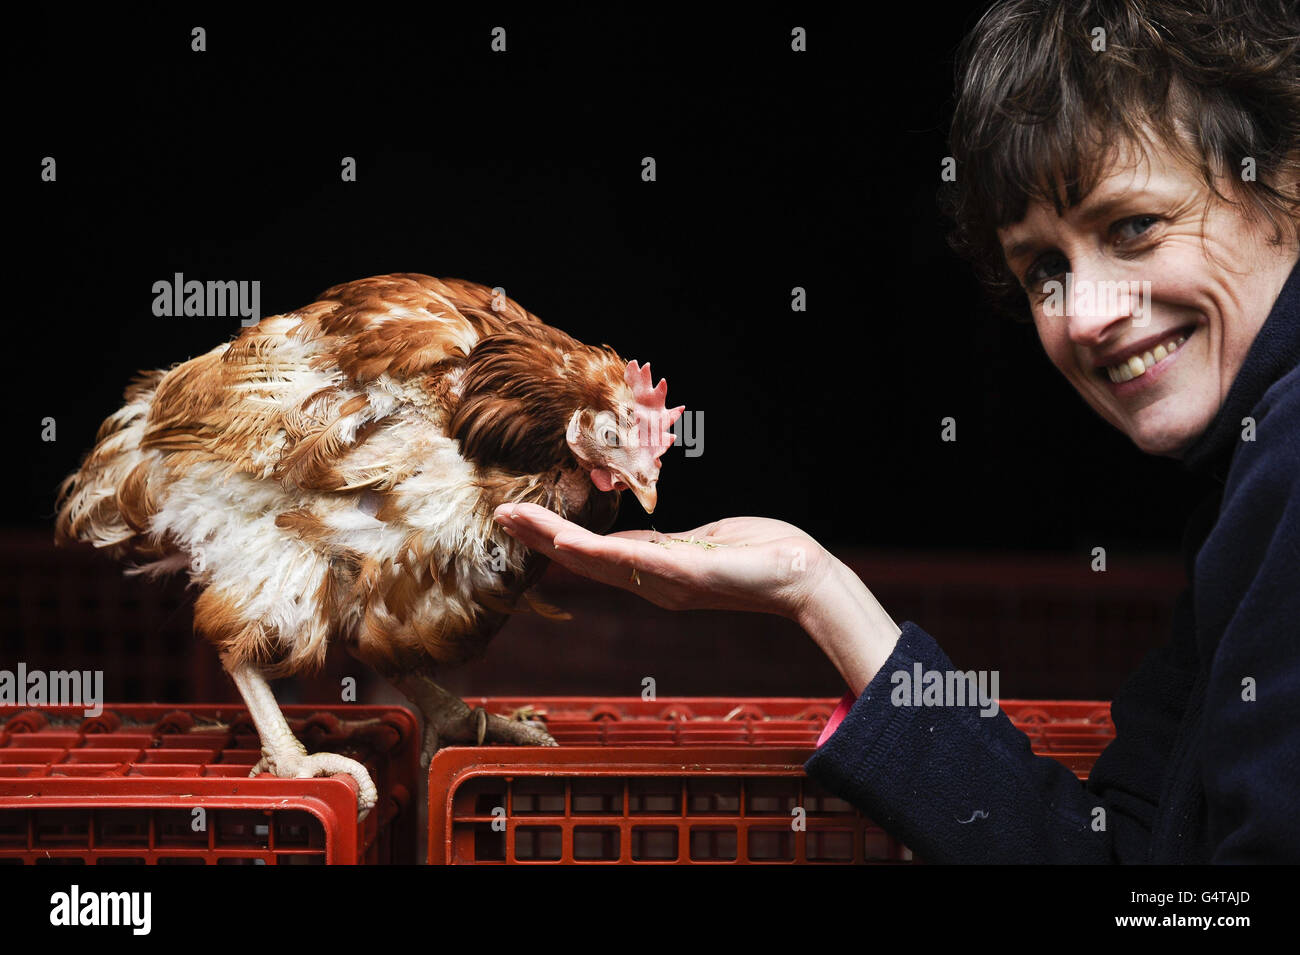 British Hen Welfare Trust founder Jane Howorth with Britain's last battery hen, Liberty, who has been re-homed retirement at a farm in Chulmleigh, Devon, marking the end of an era for commercial laying hens, the charity said. Stock Photo